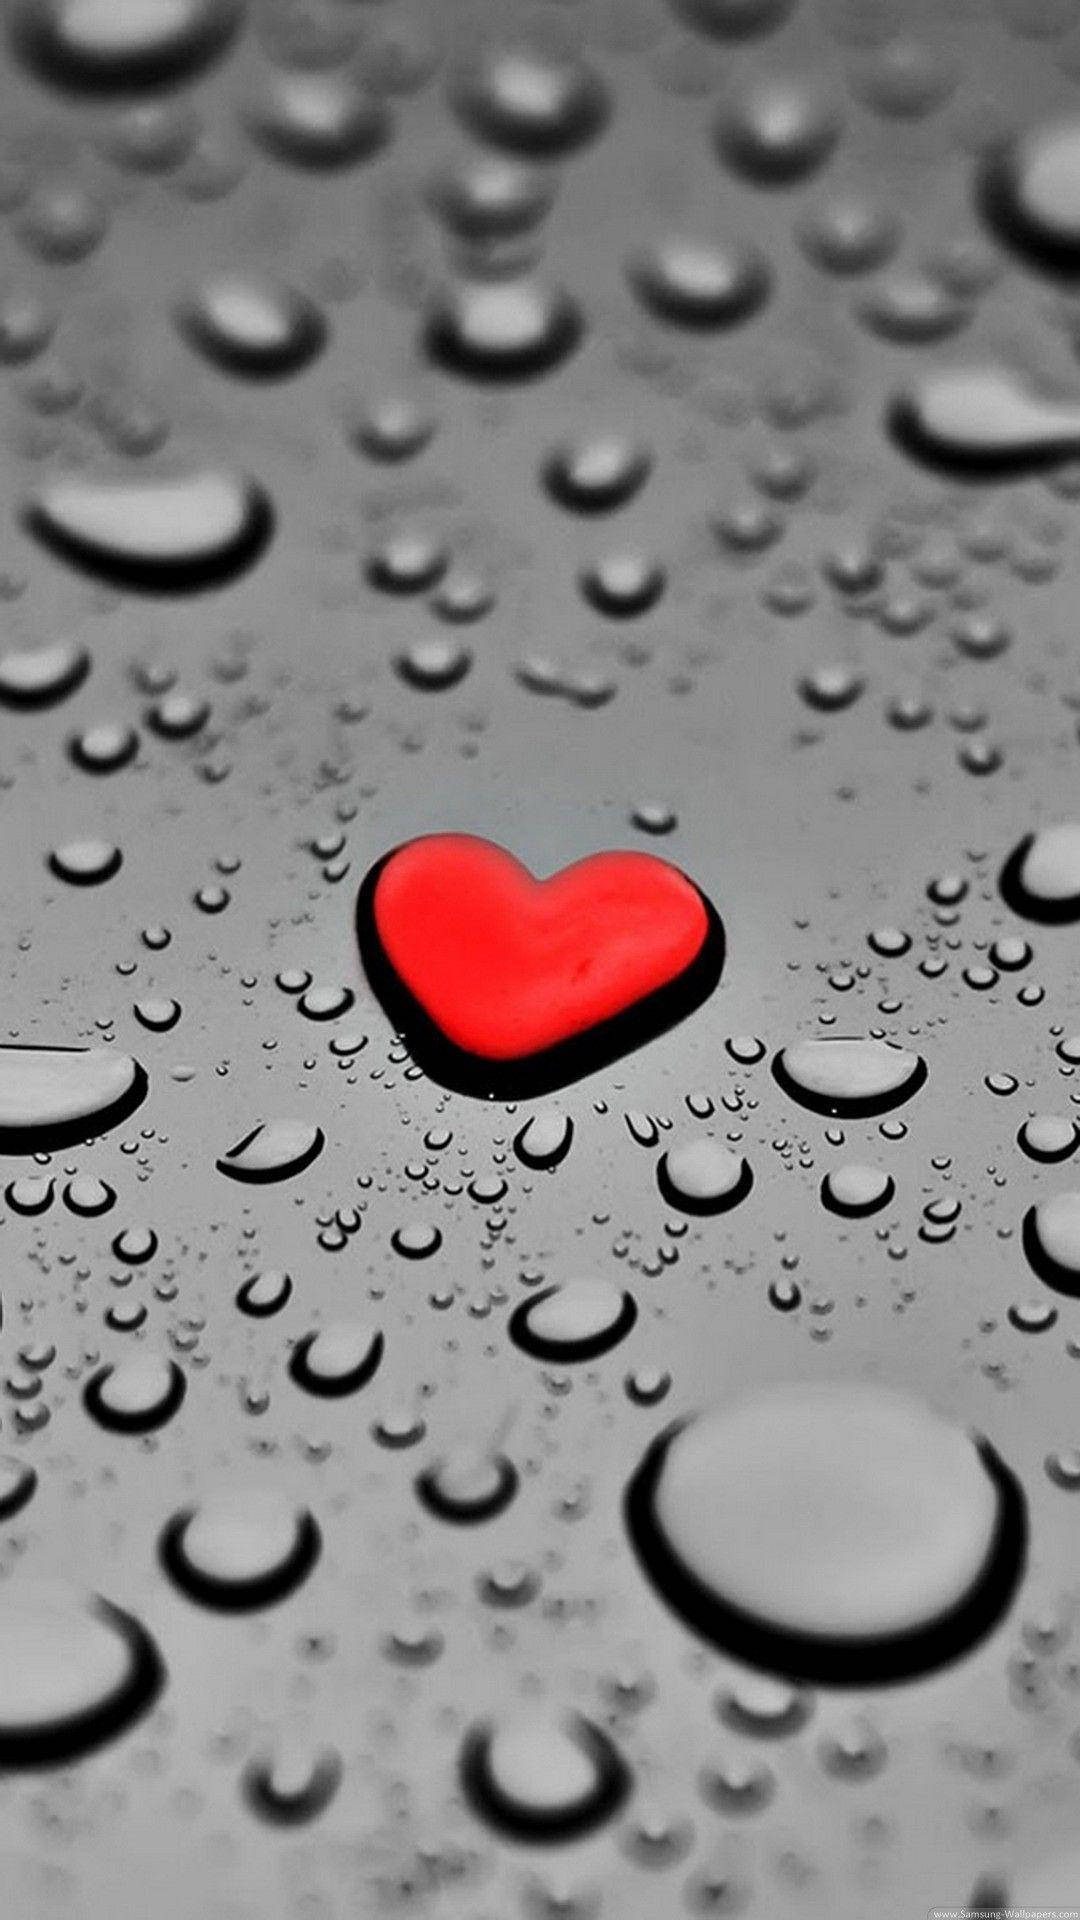 Red Heart Water Droplets Love Phone Wallpaper